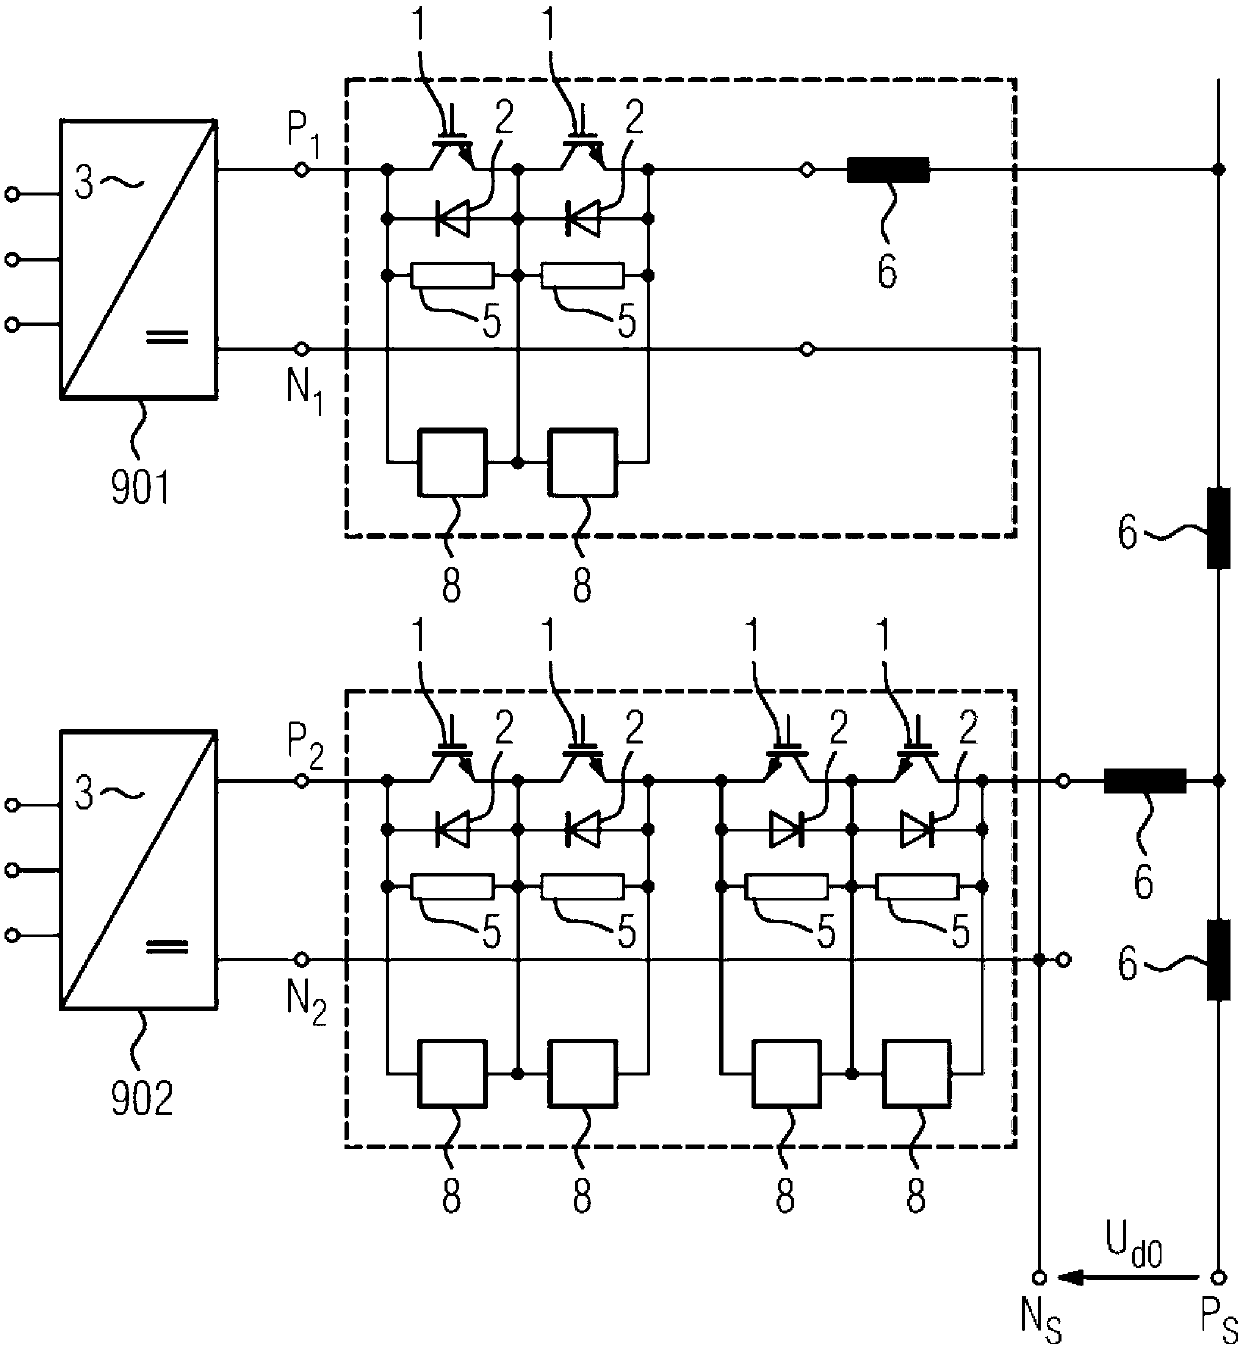 Circuit arrangements for electronically controlled DC networks